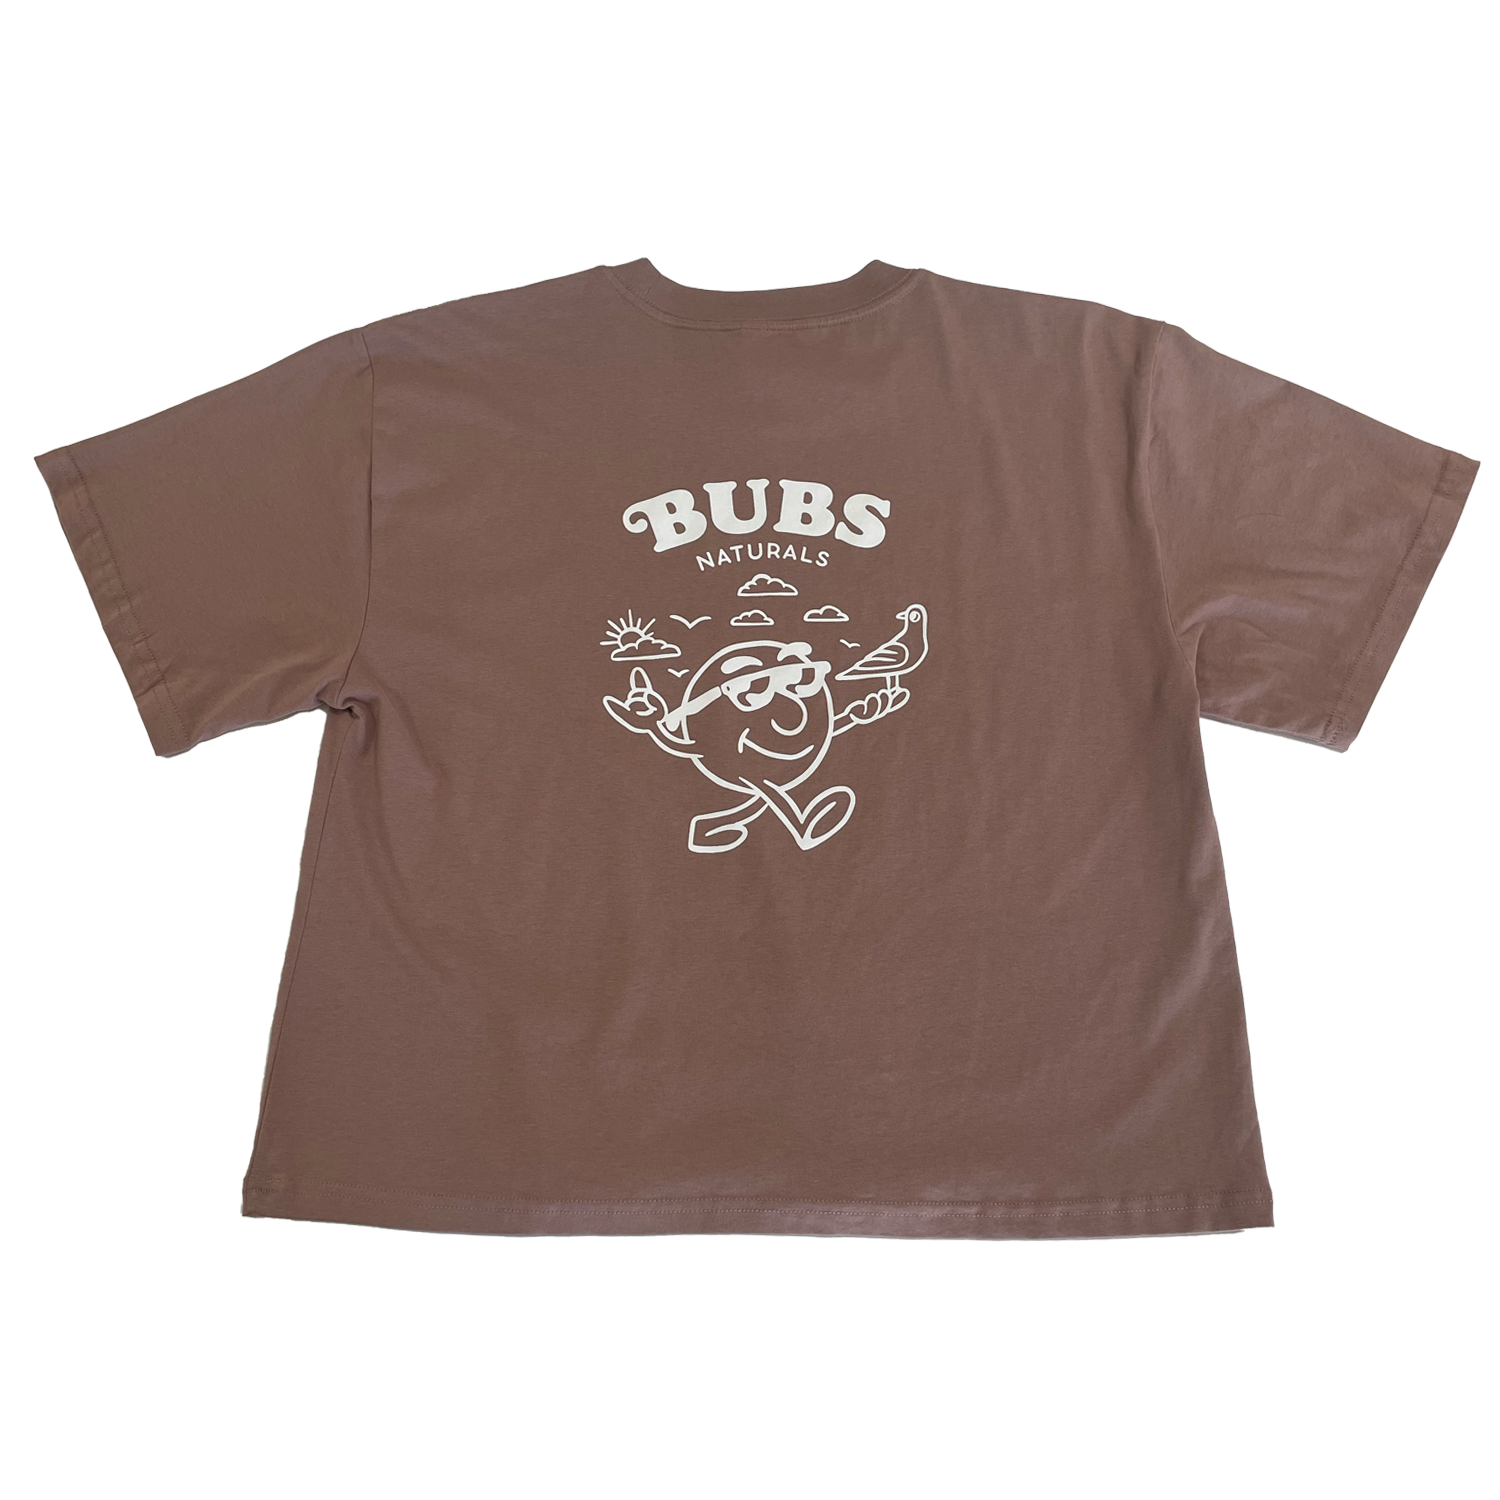 BUBS Naturals Dusty Pink Smiley Tee, Back